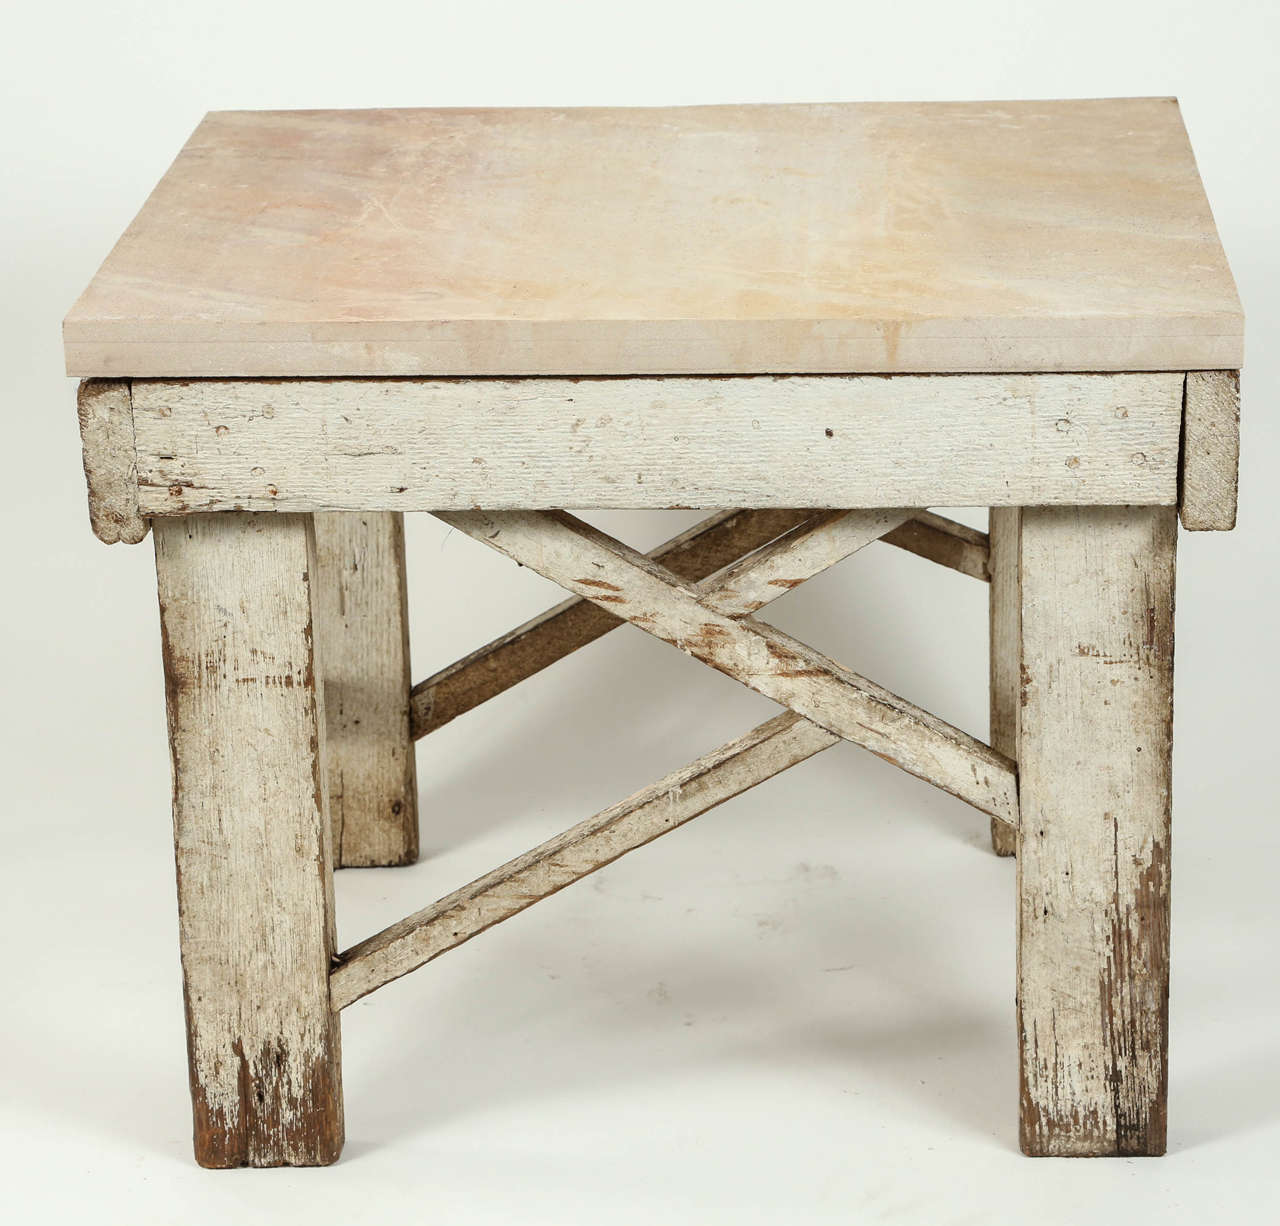 One of a kind architectural table, wooden base and 1.25 inch thick limestone table top.